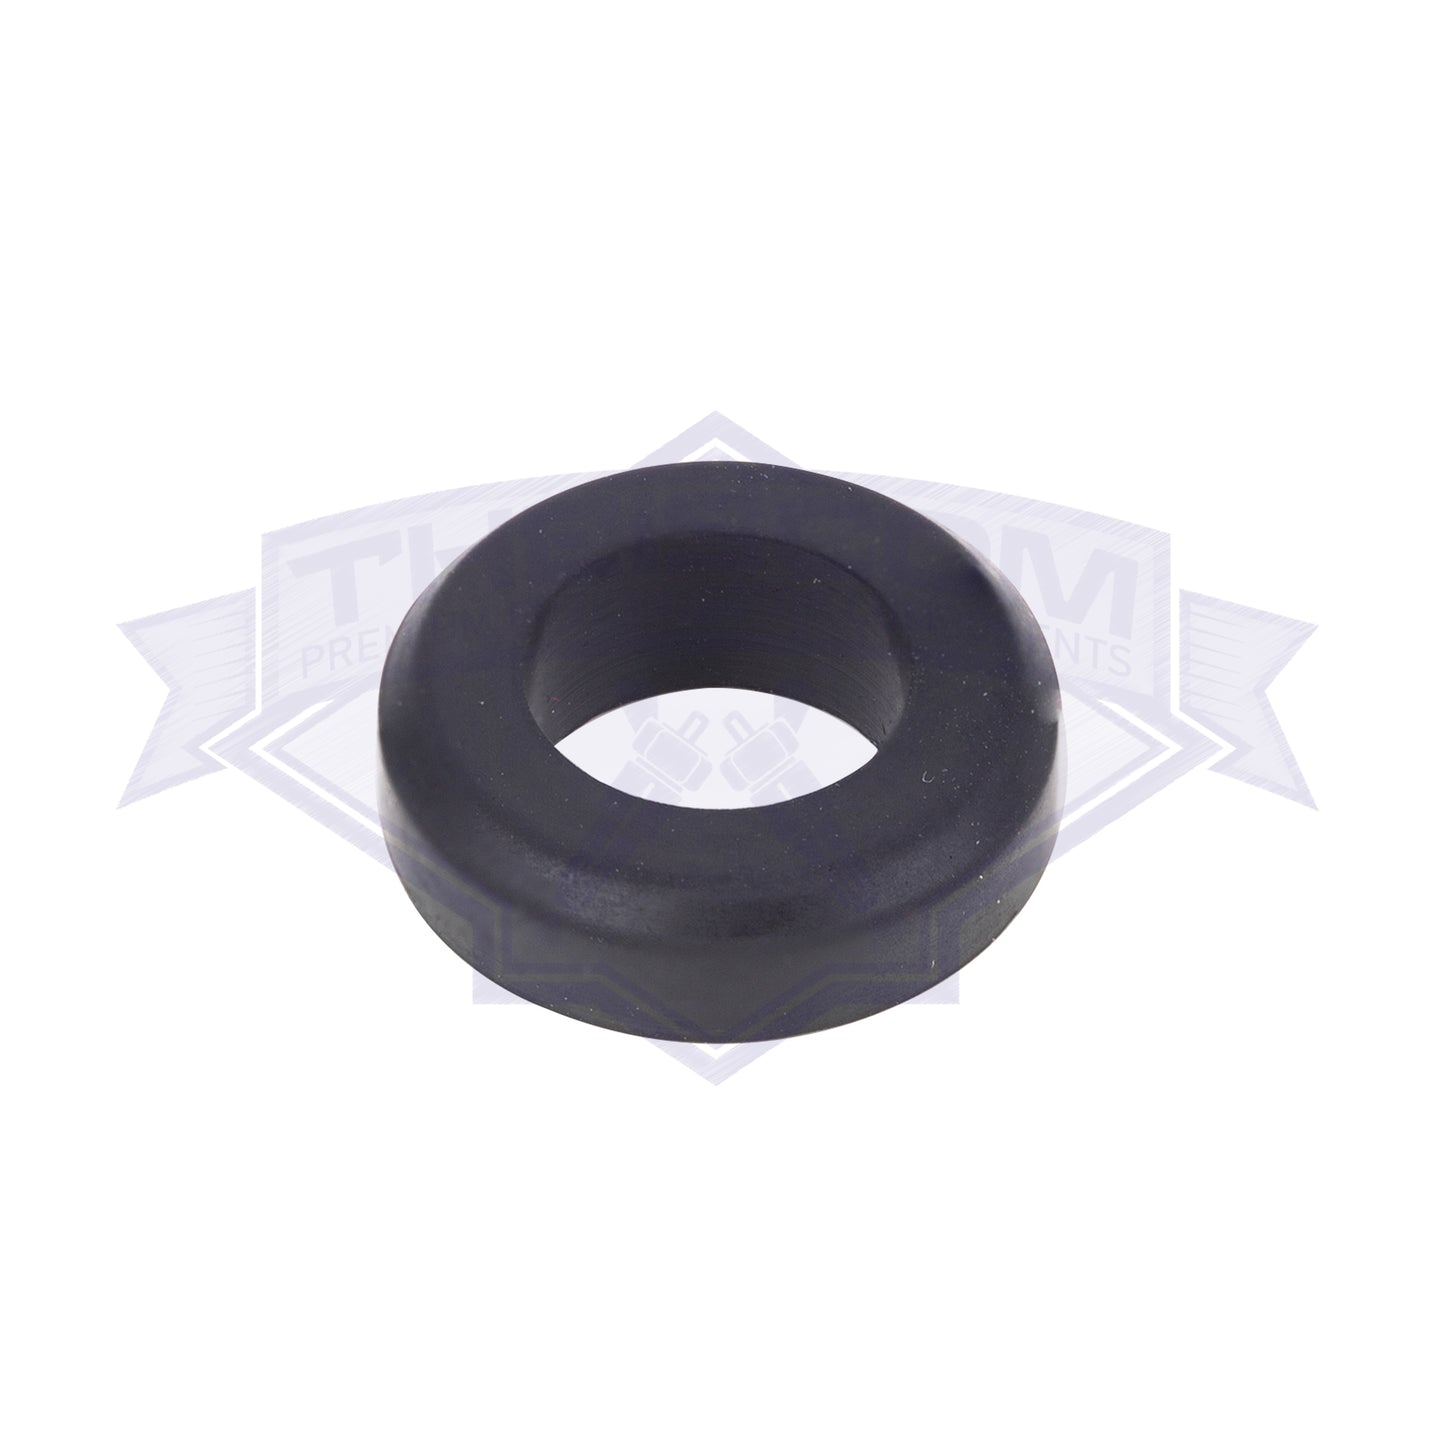 fuel injector o-ring